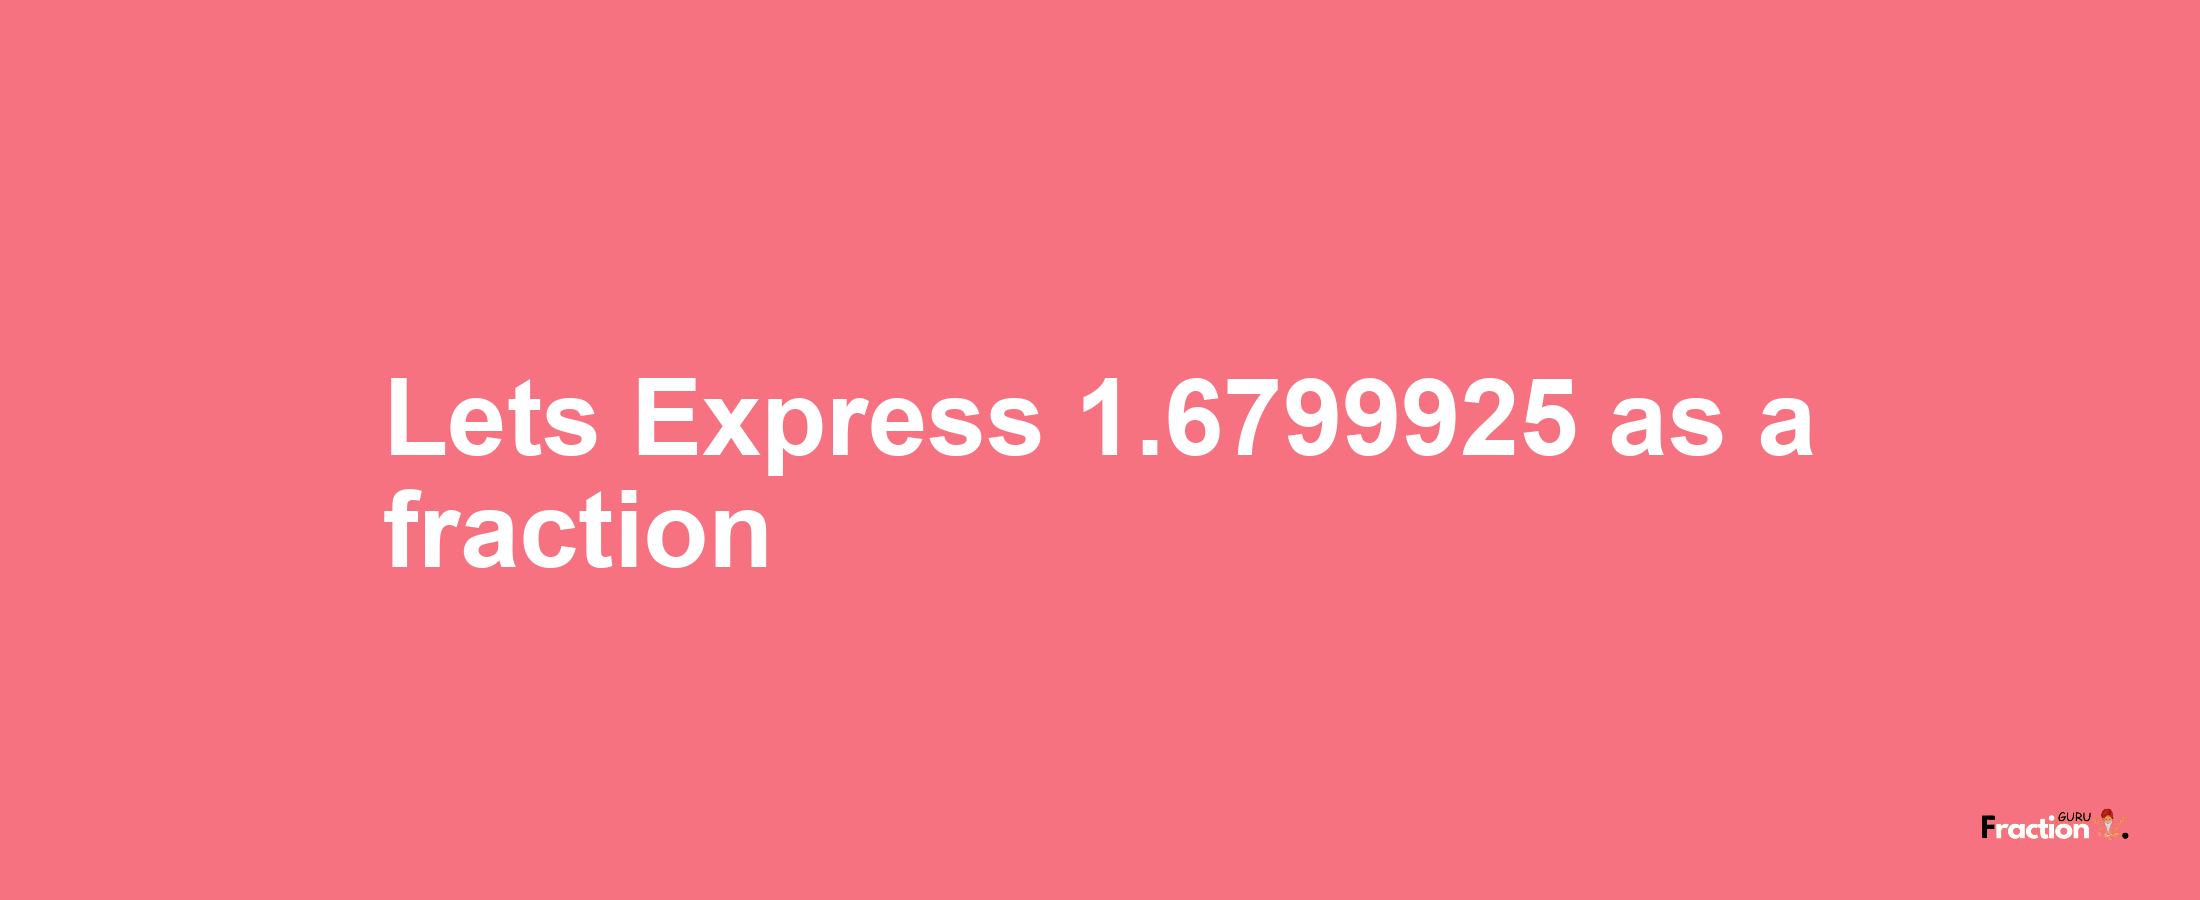 Lets Express 1.6799925 as afraction